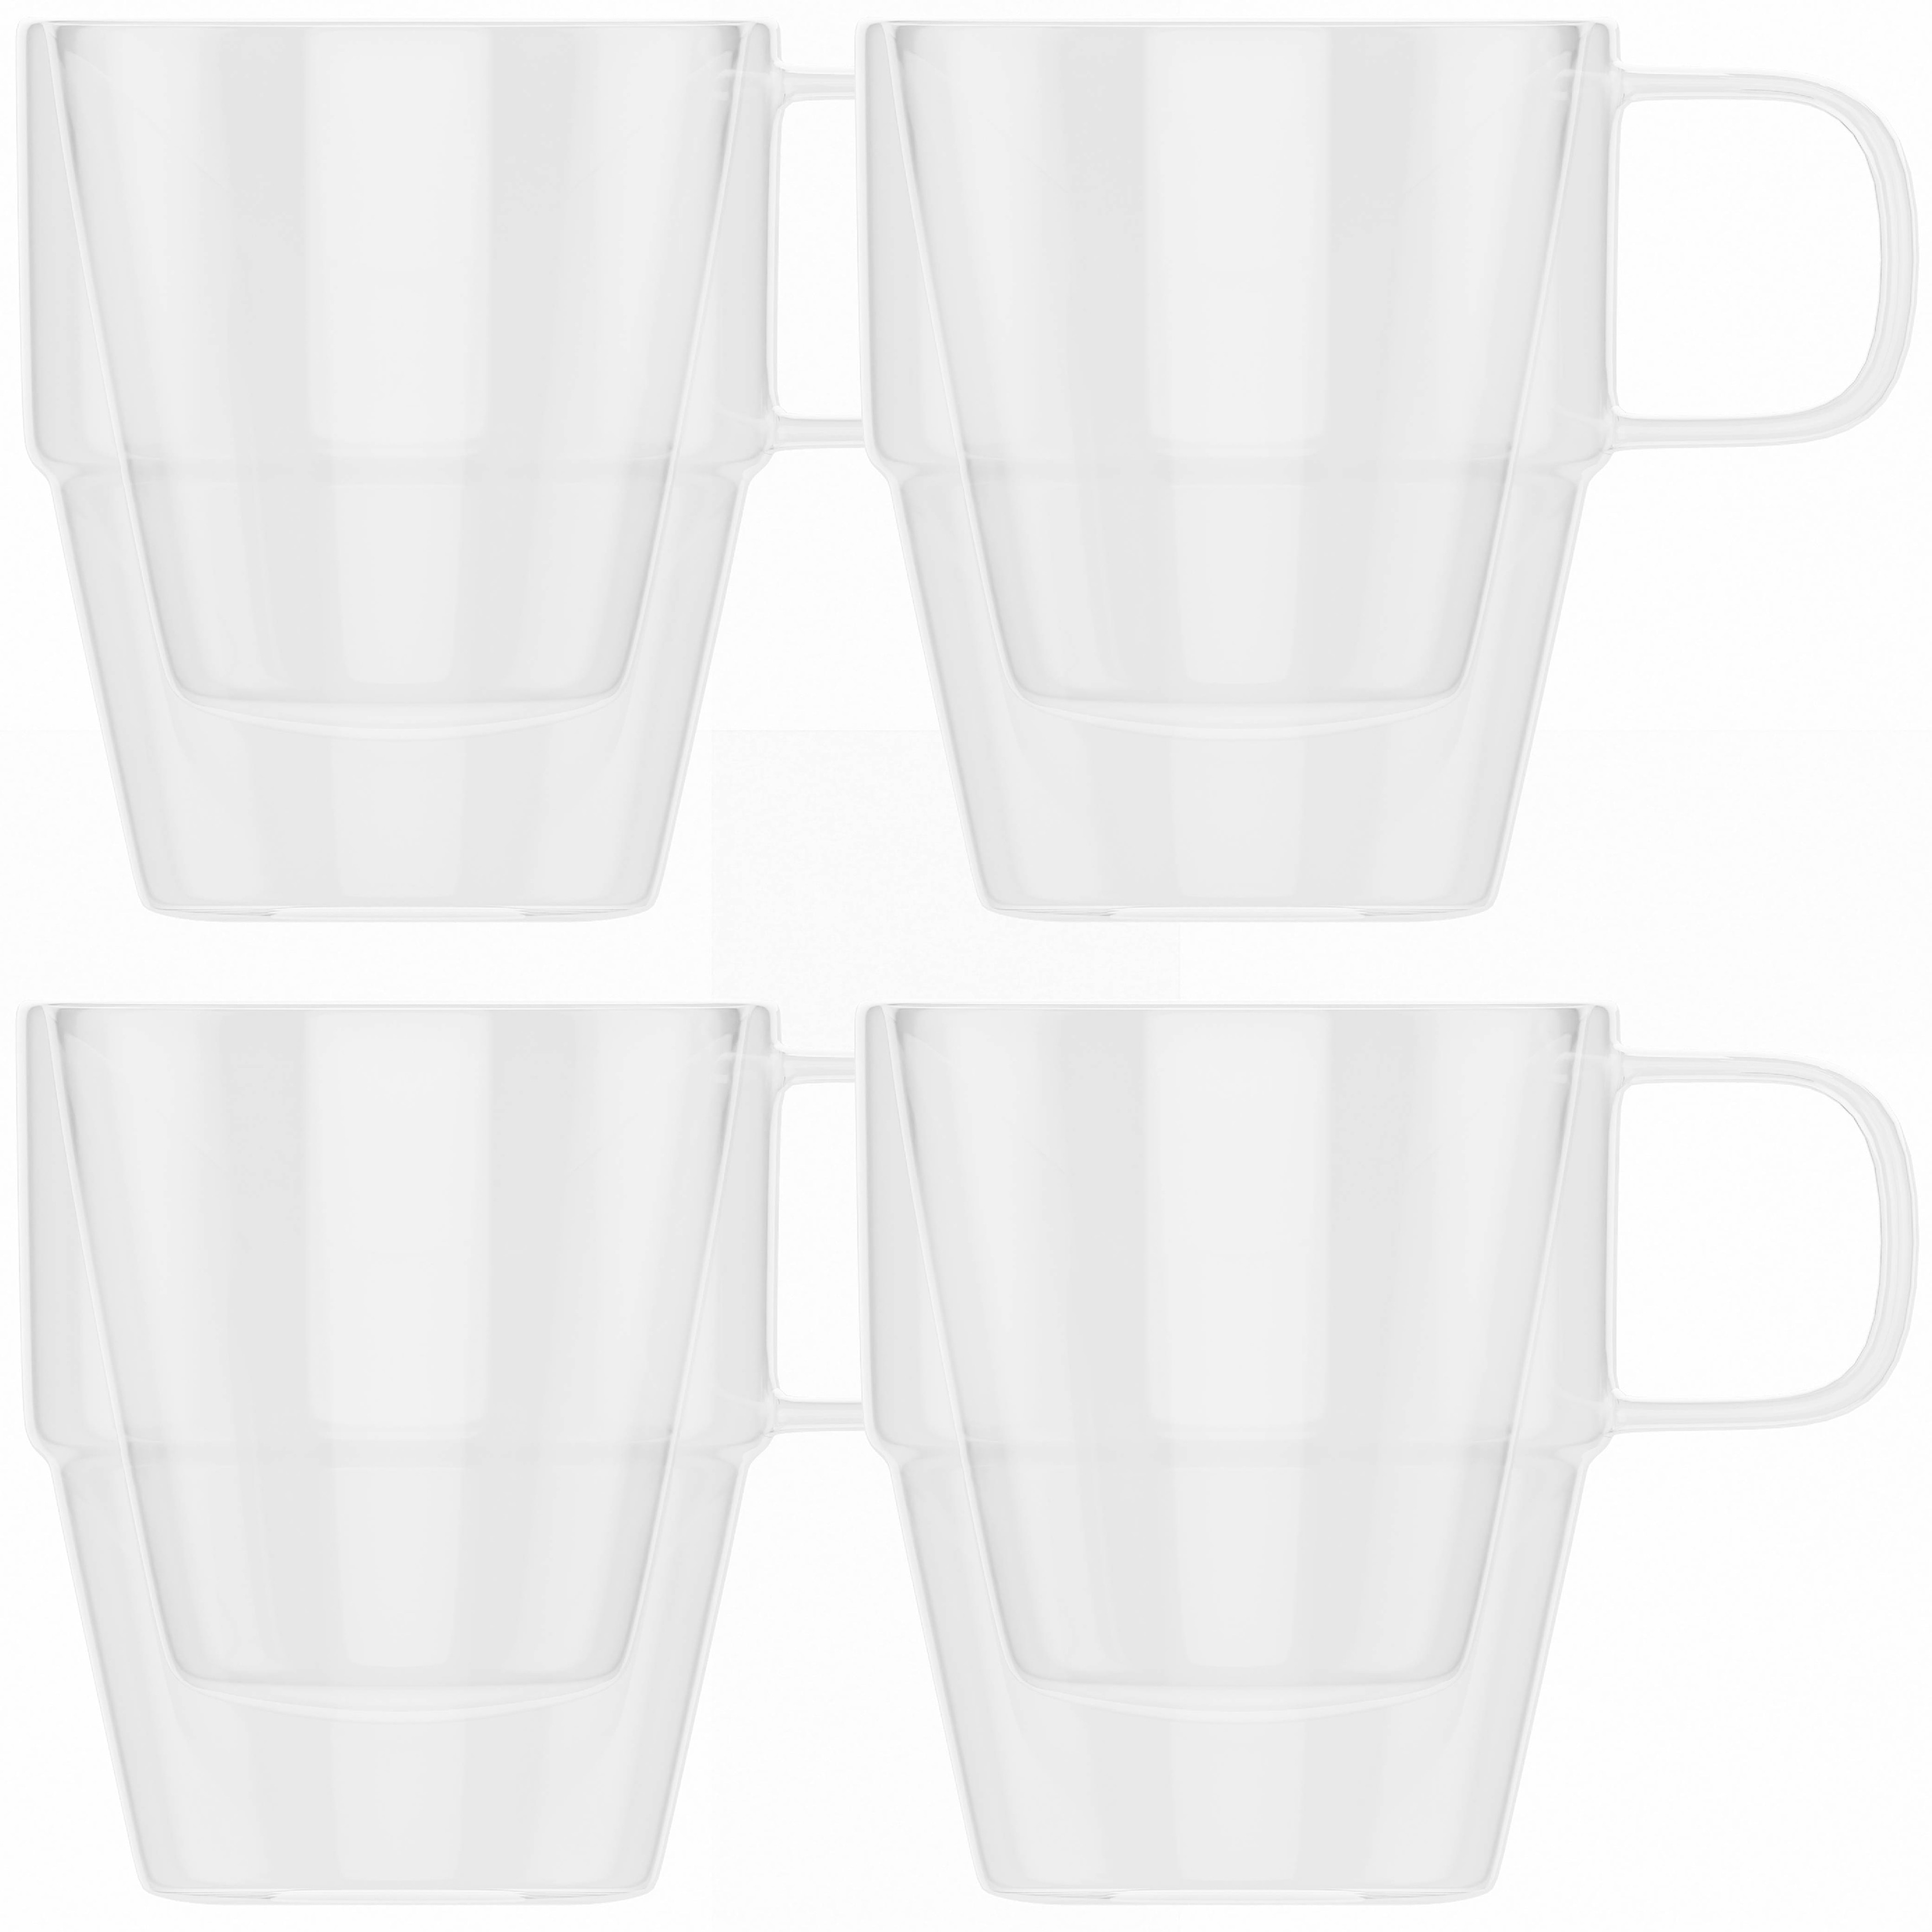 Elle Decor Set of 2 Double Wall Insulated Glasses, 8 oz Borosilicate  Glasses for Hot and Cold Drinks, Clear